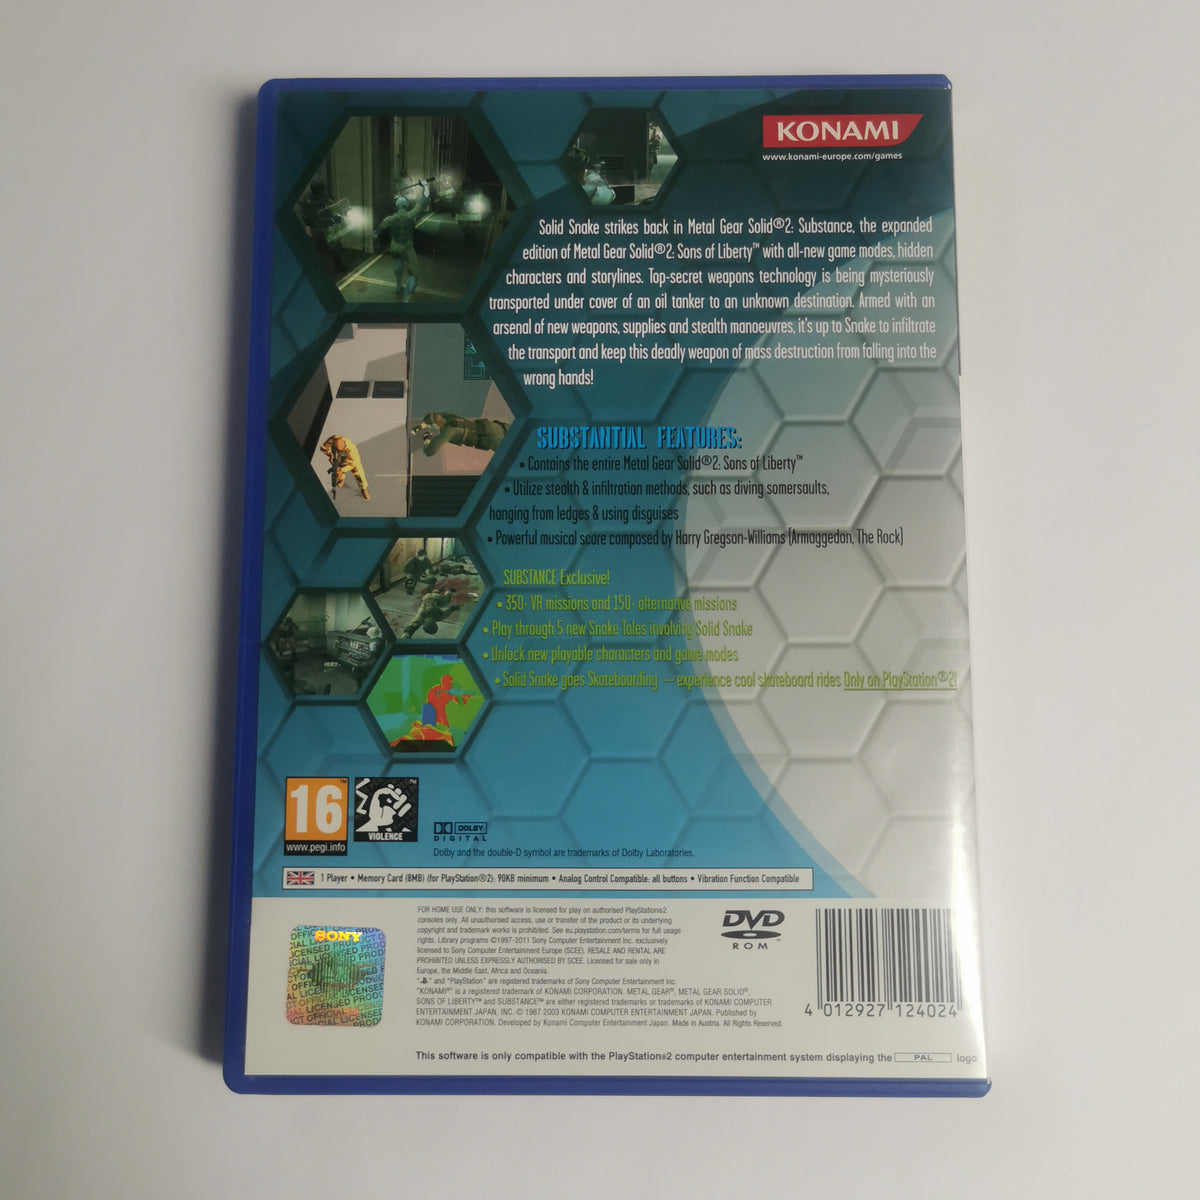 Metal Gear Solid 2: Substance [PS2]